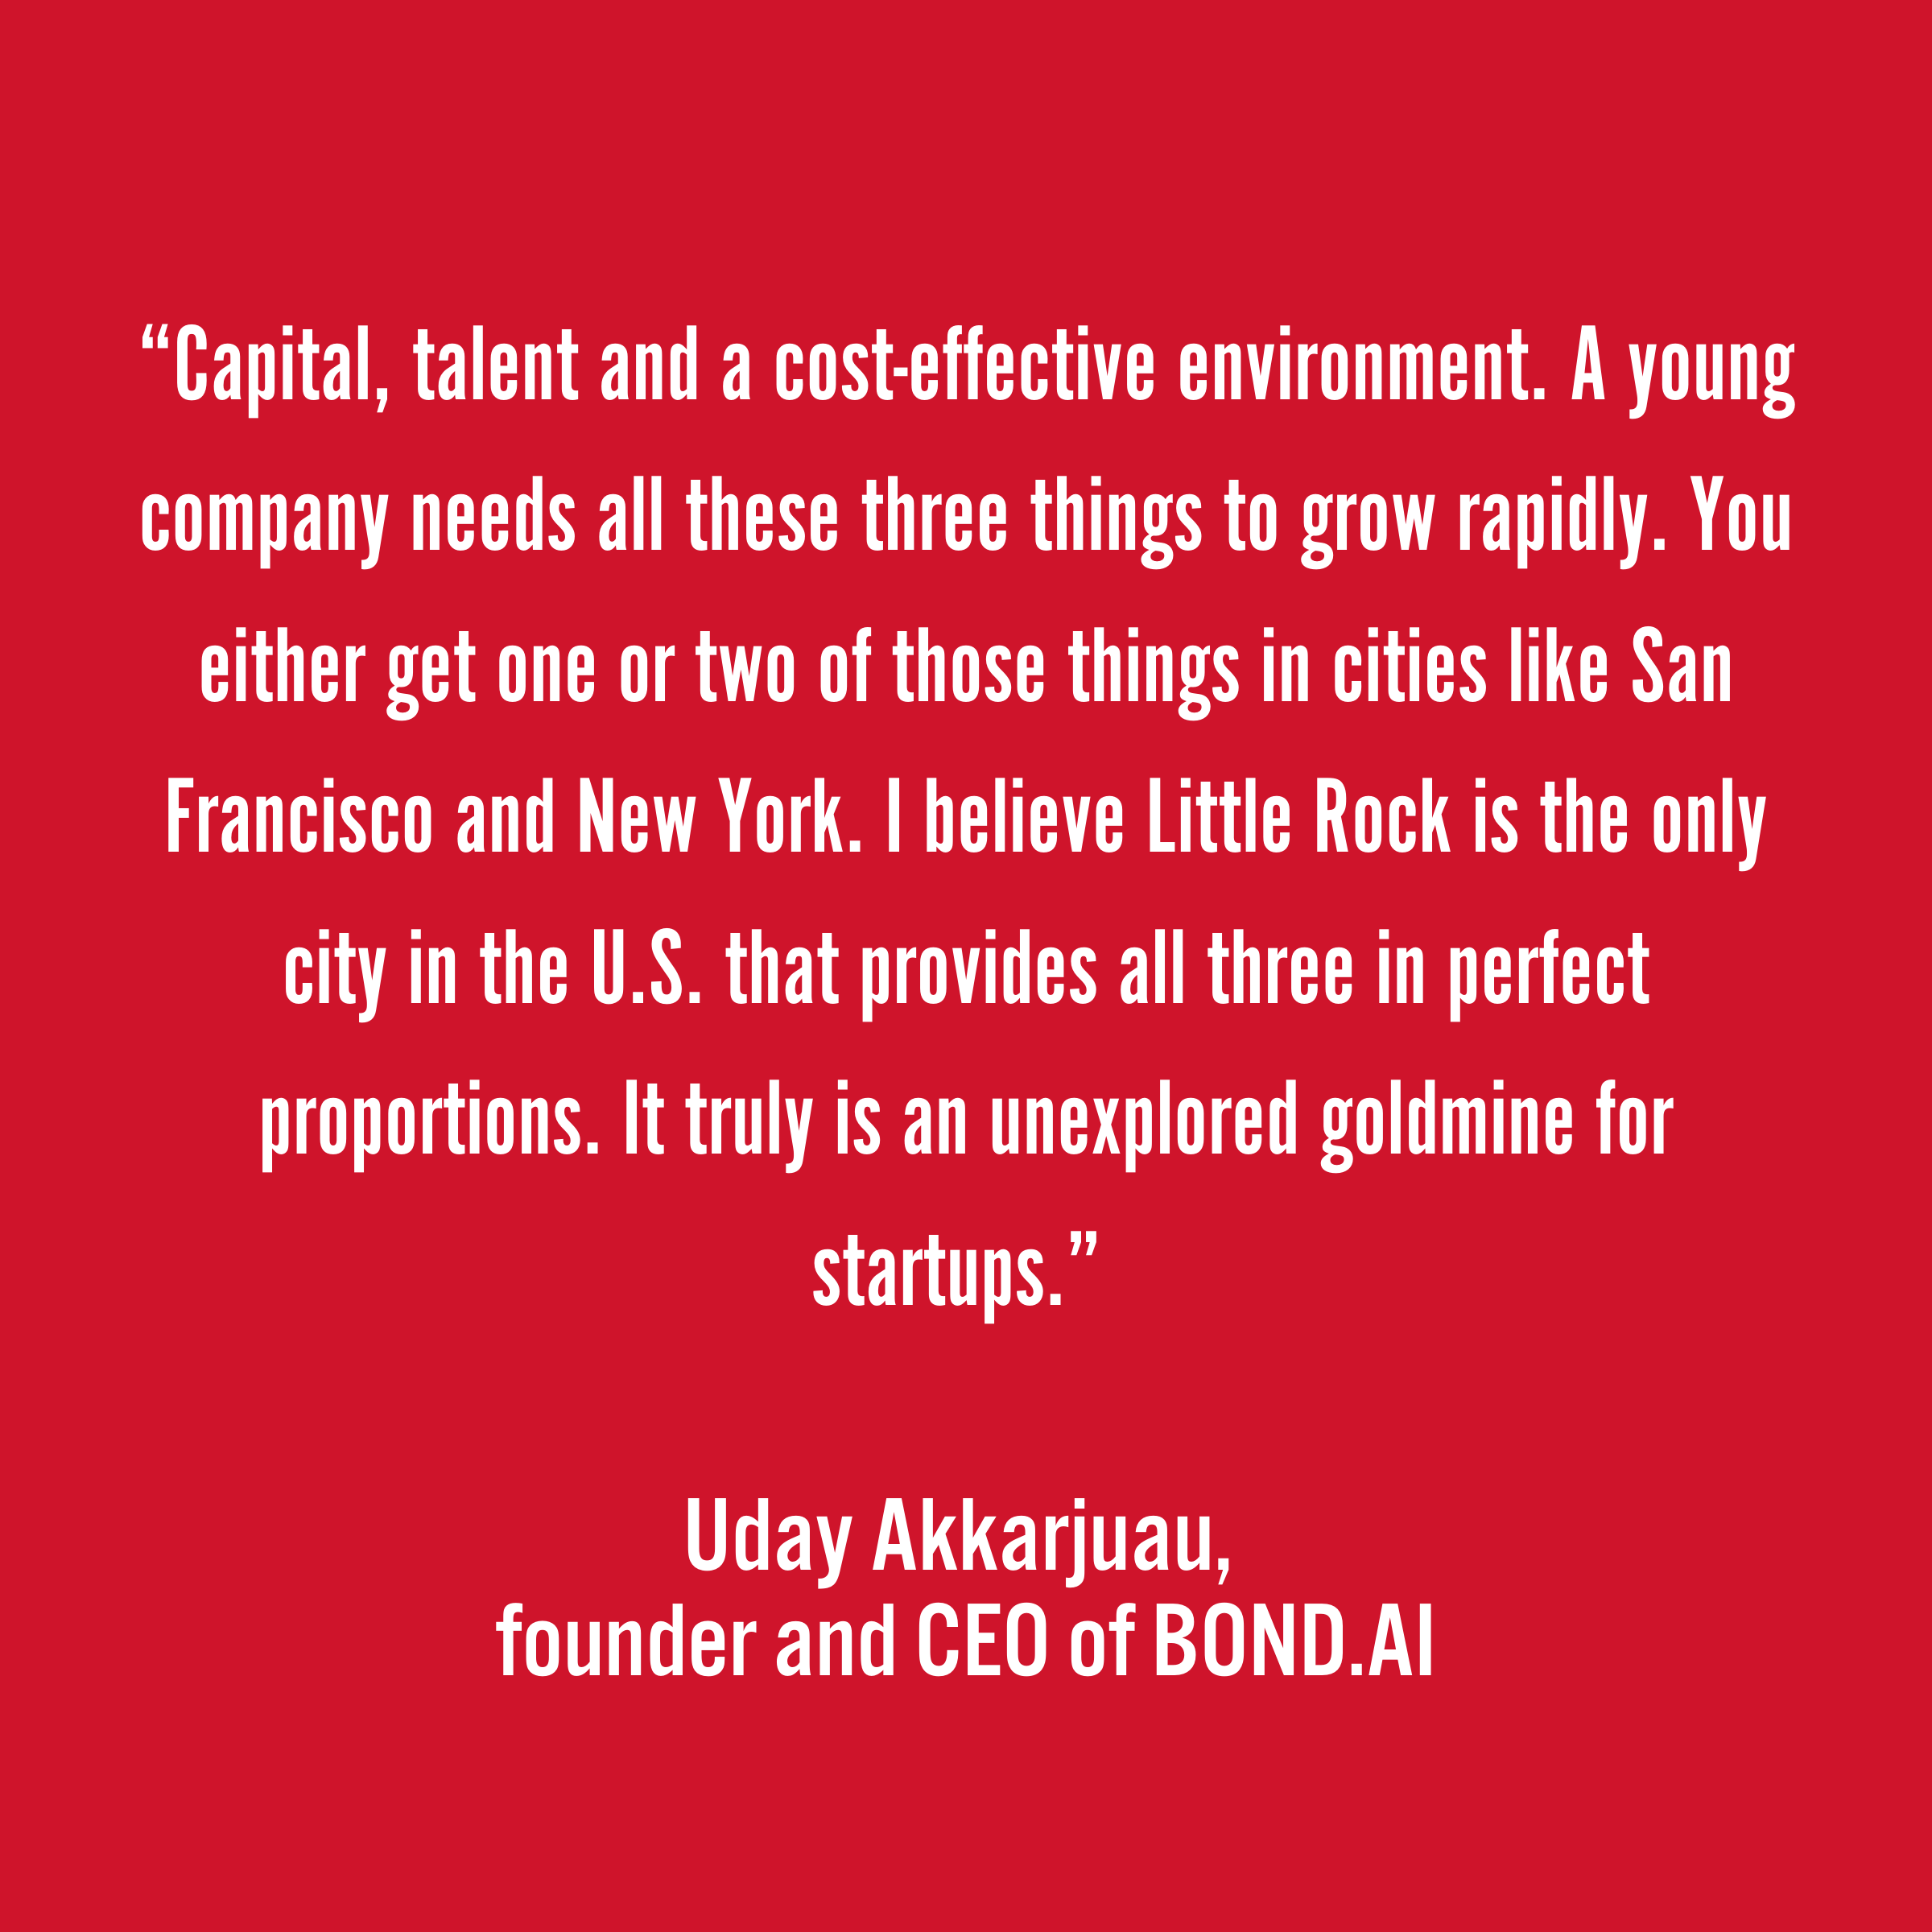 “Capital, talent and a cost-effective environment. A young company needs all these three things to grow rapidly. You either get one or two of those things in cities like San Francisco and New York. I believe L